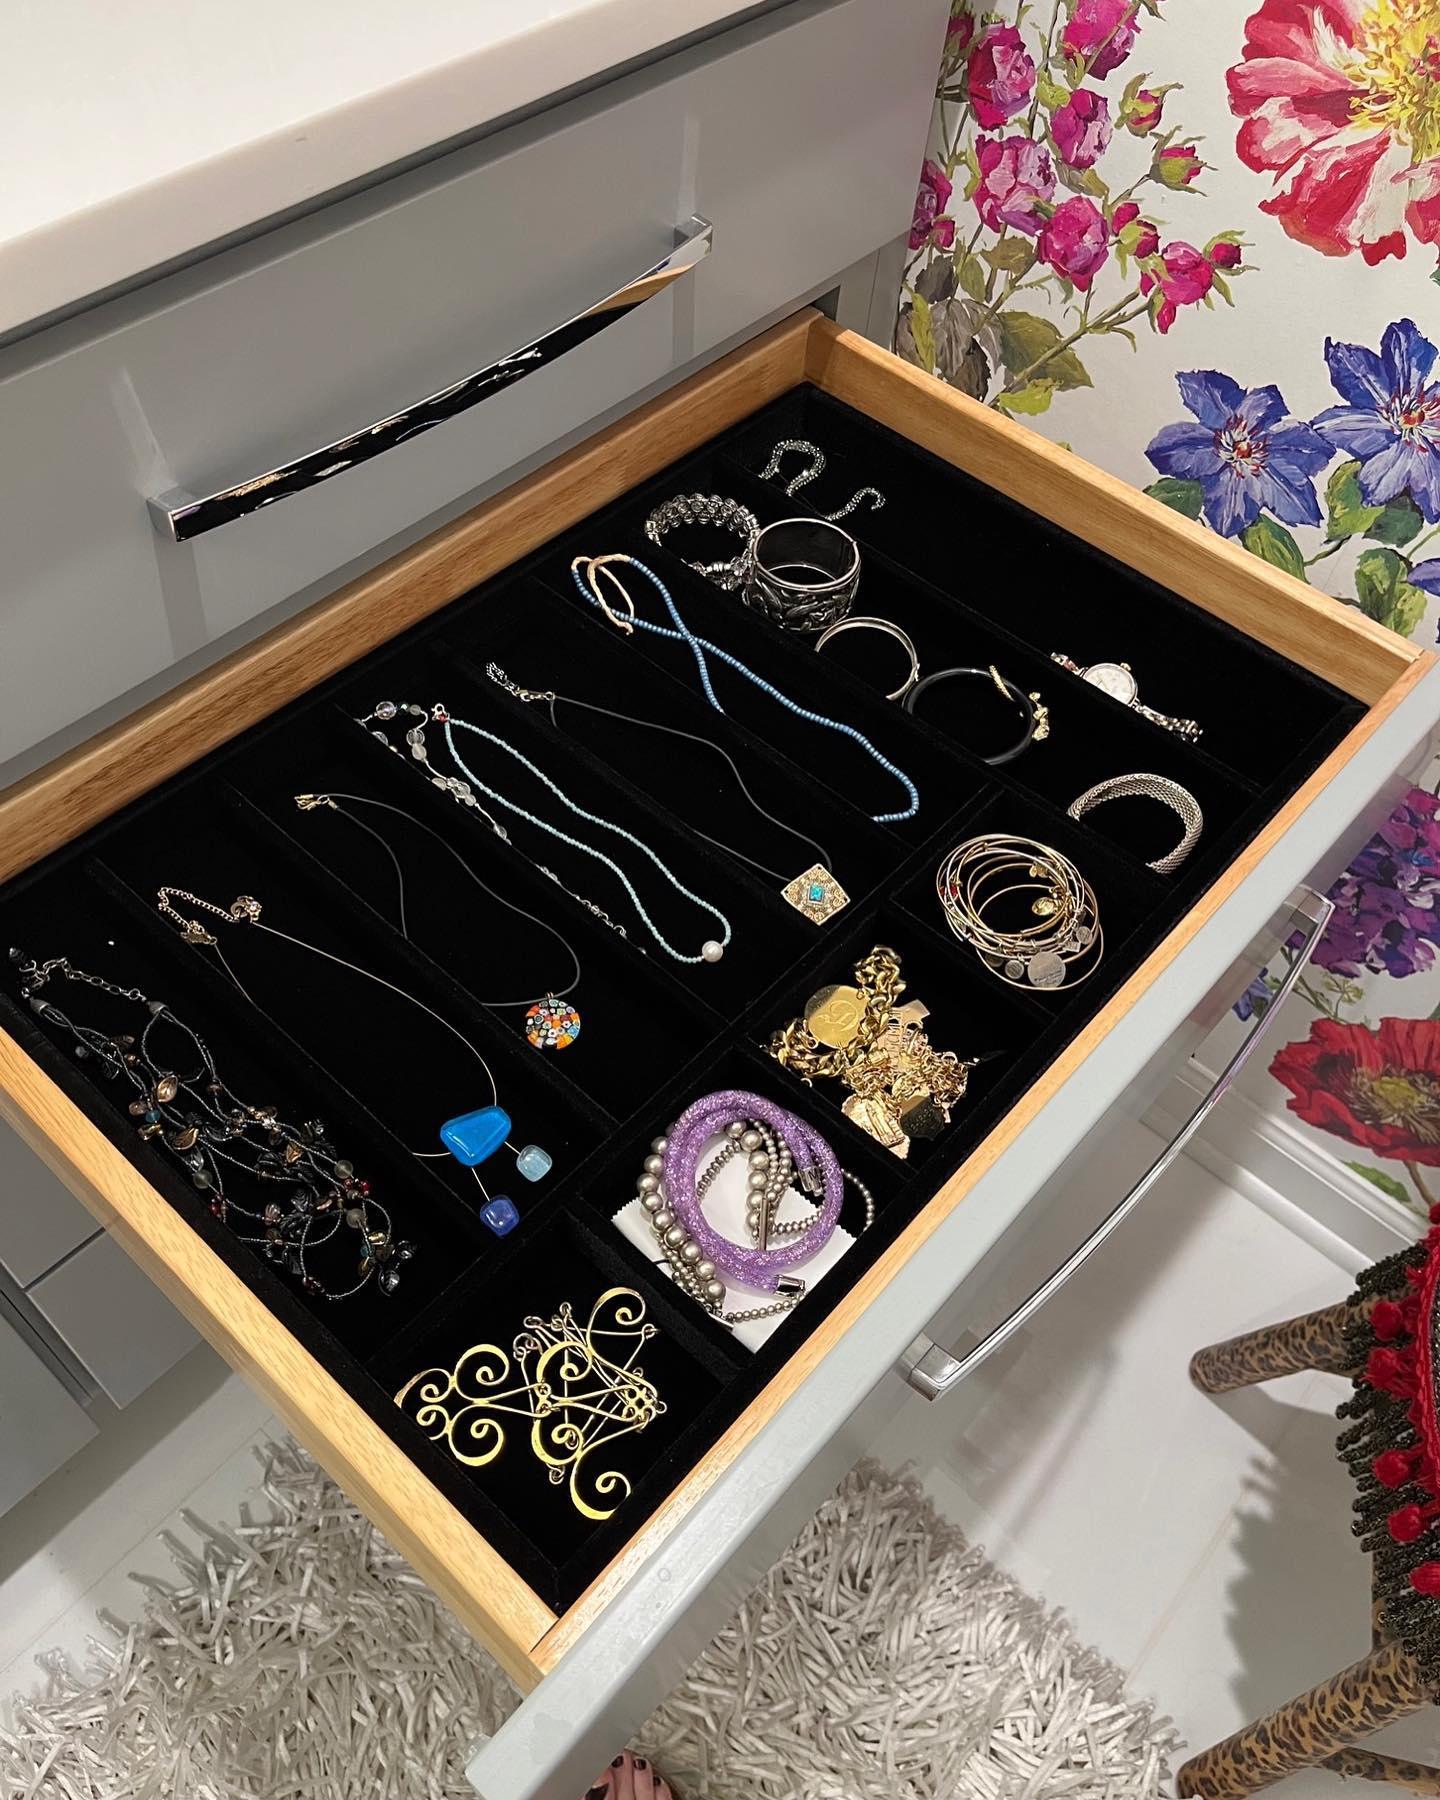 10 Jewelry Storage Solutions to Hold Your Treasures | LoveToKnow